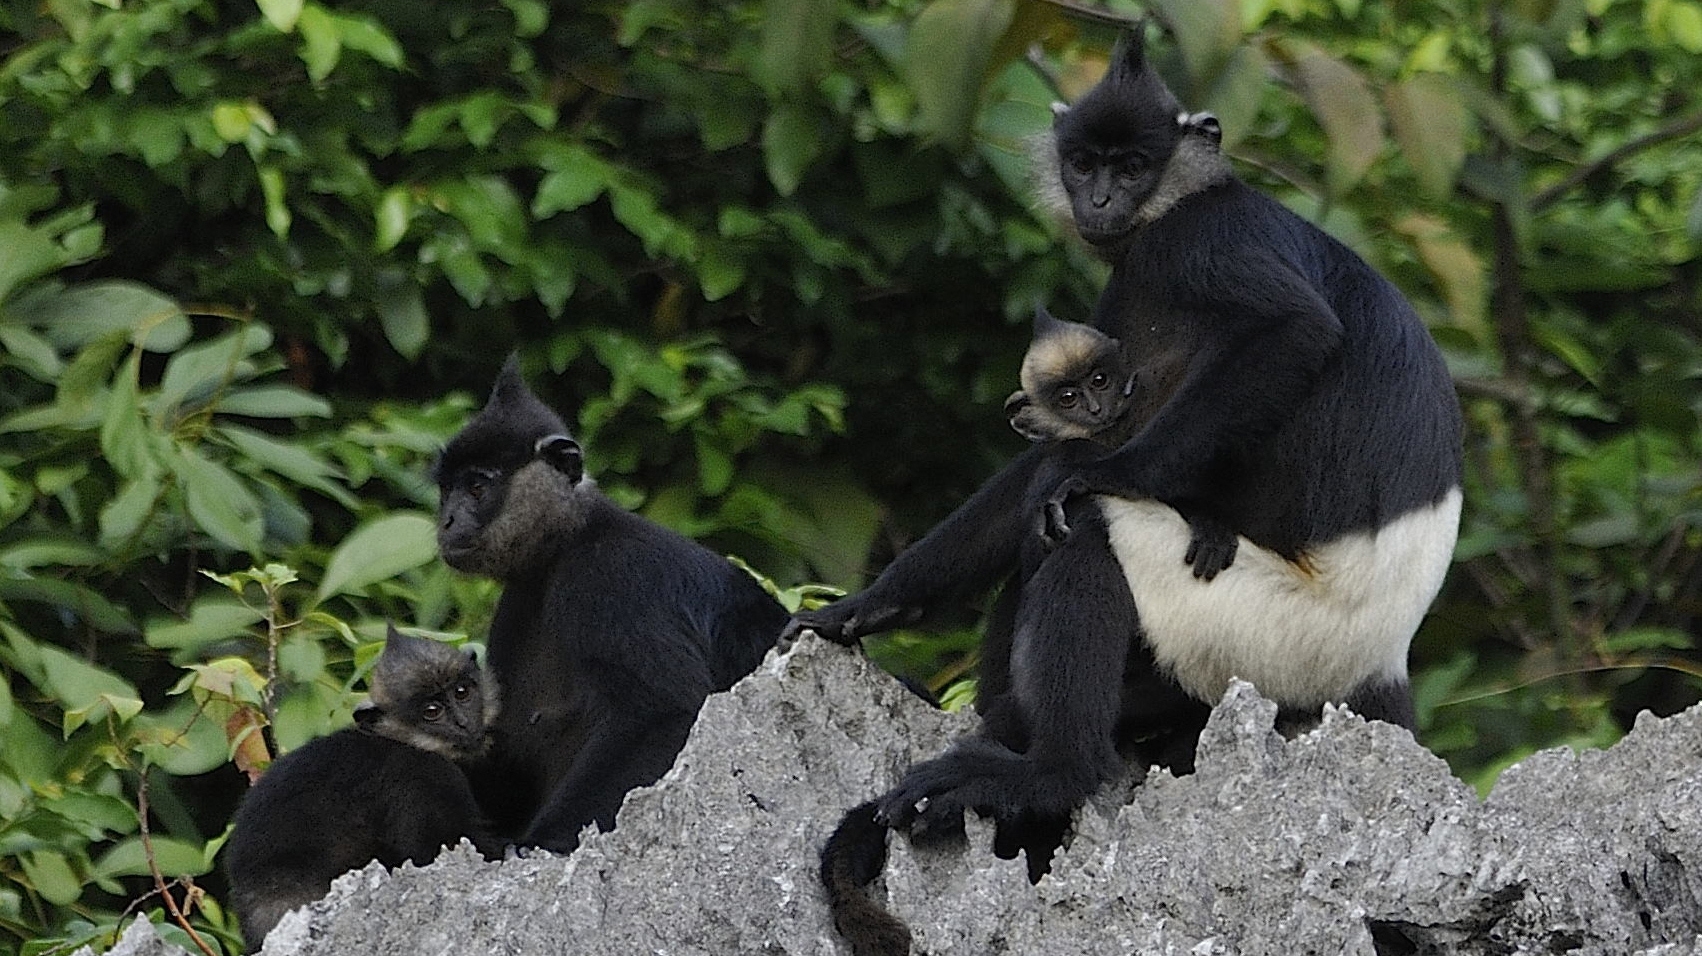 Langur is one of the endangered animals preserved in Cuc Phuong National Park